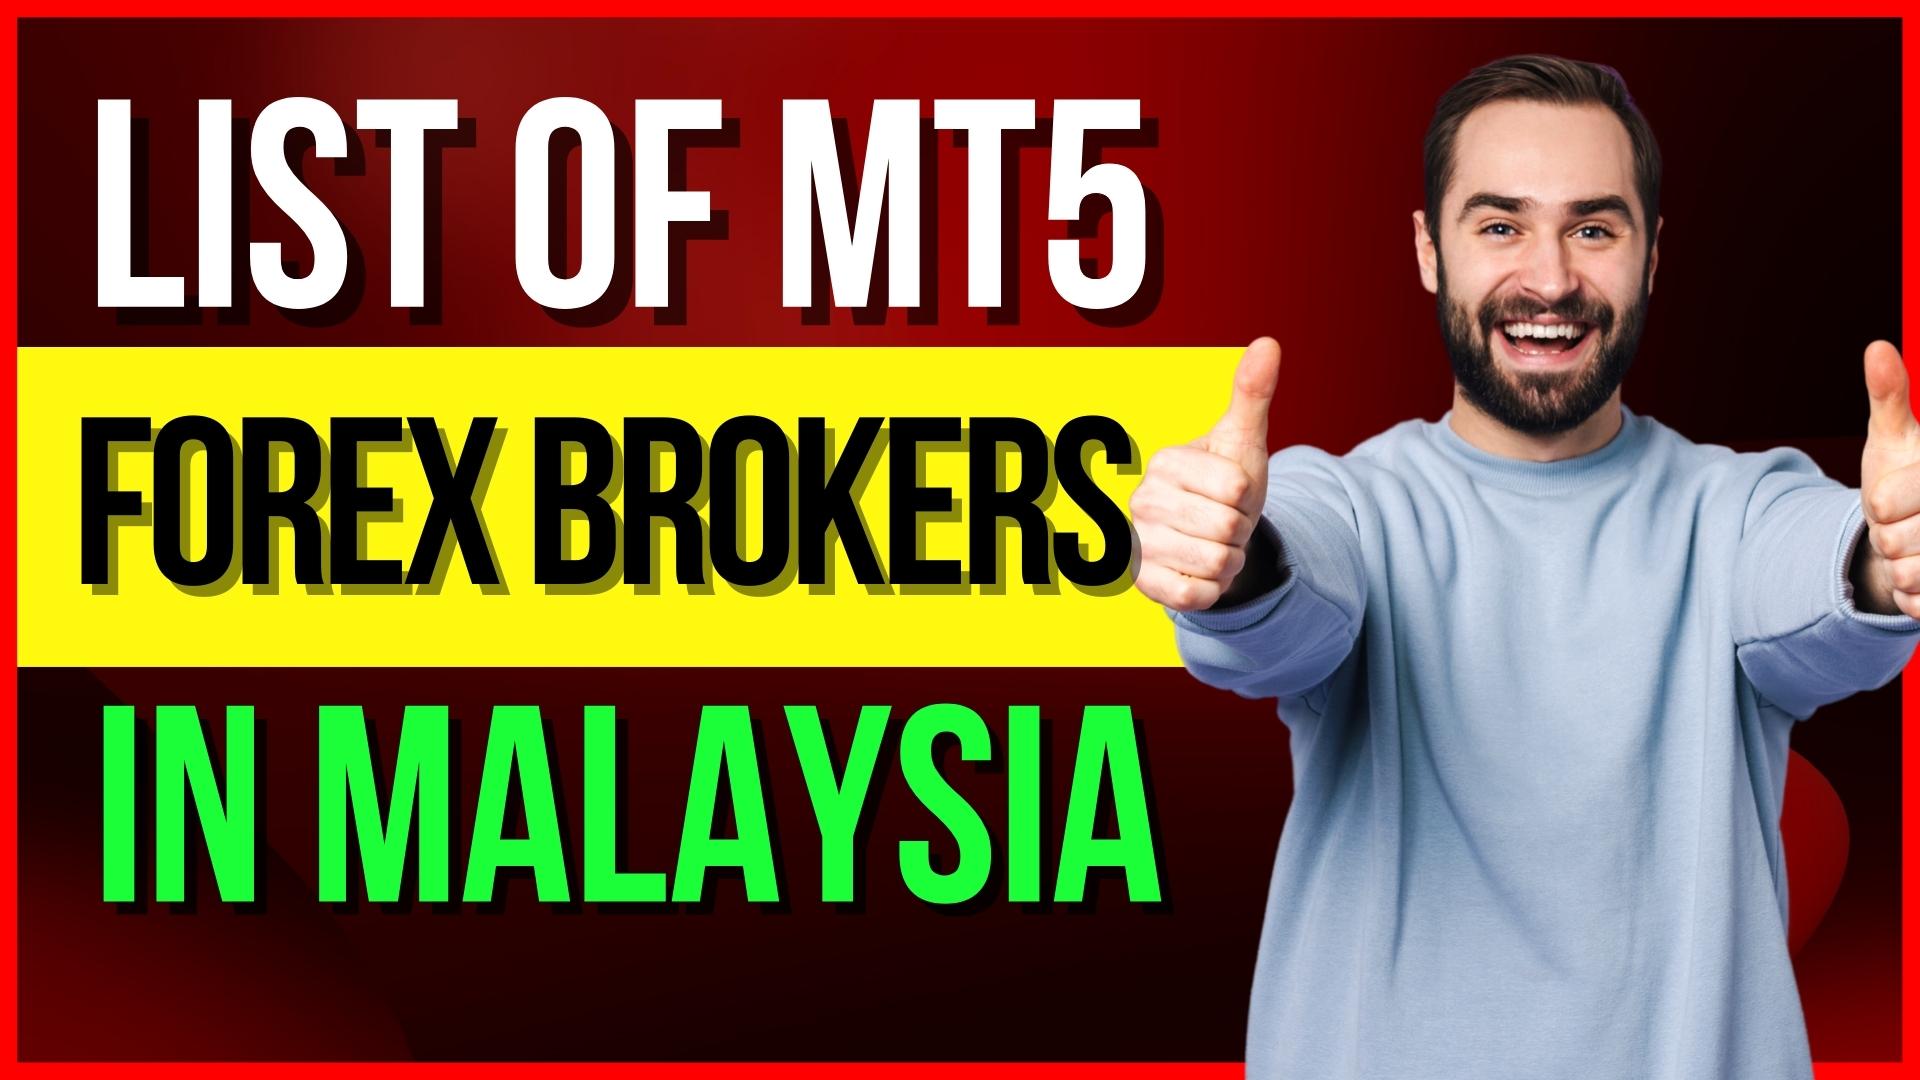 List Of MT5 Forex Brokers In Malaysia - Malaysia Forex Trading | Onlinestockbrokersreviews.com